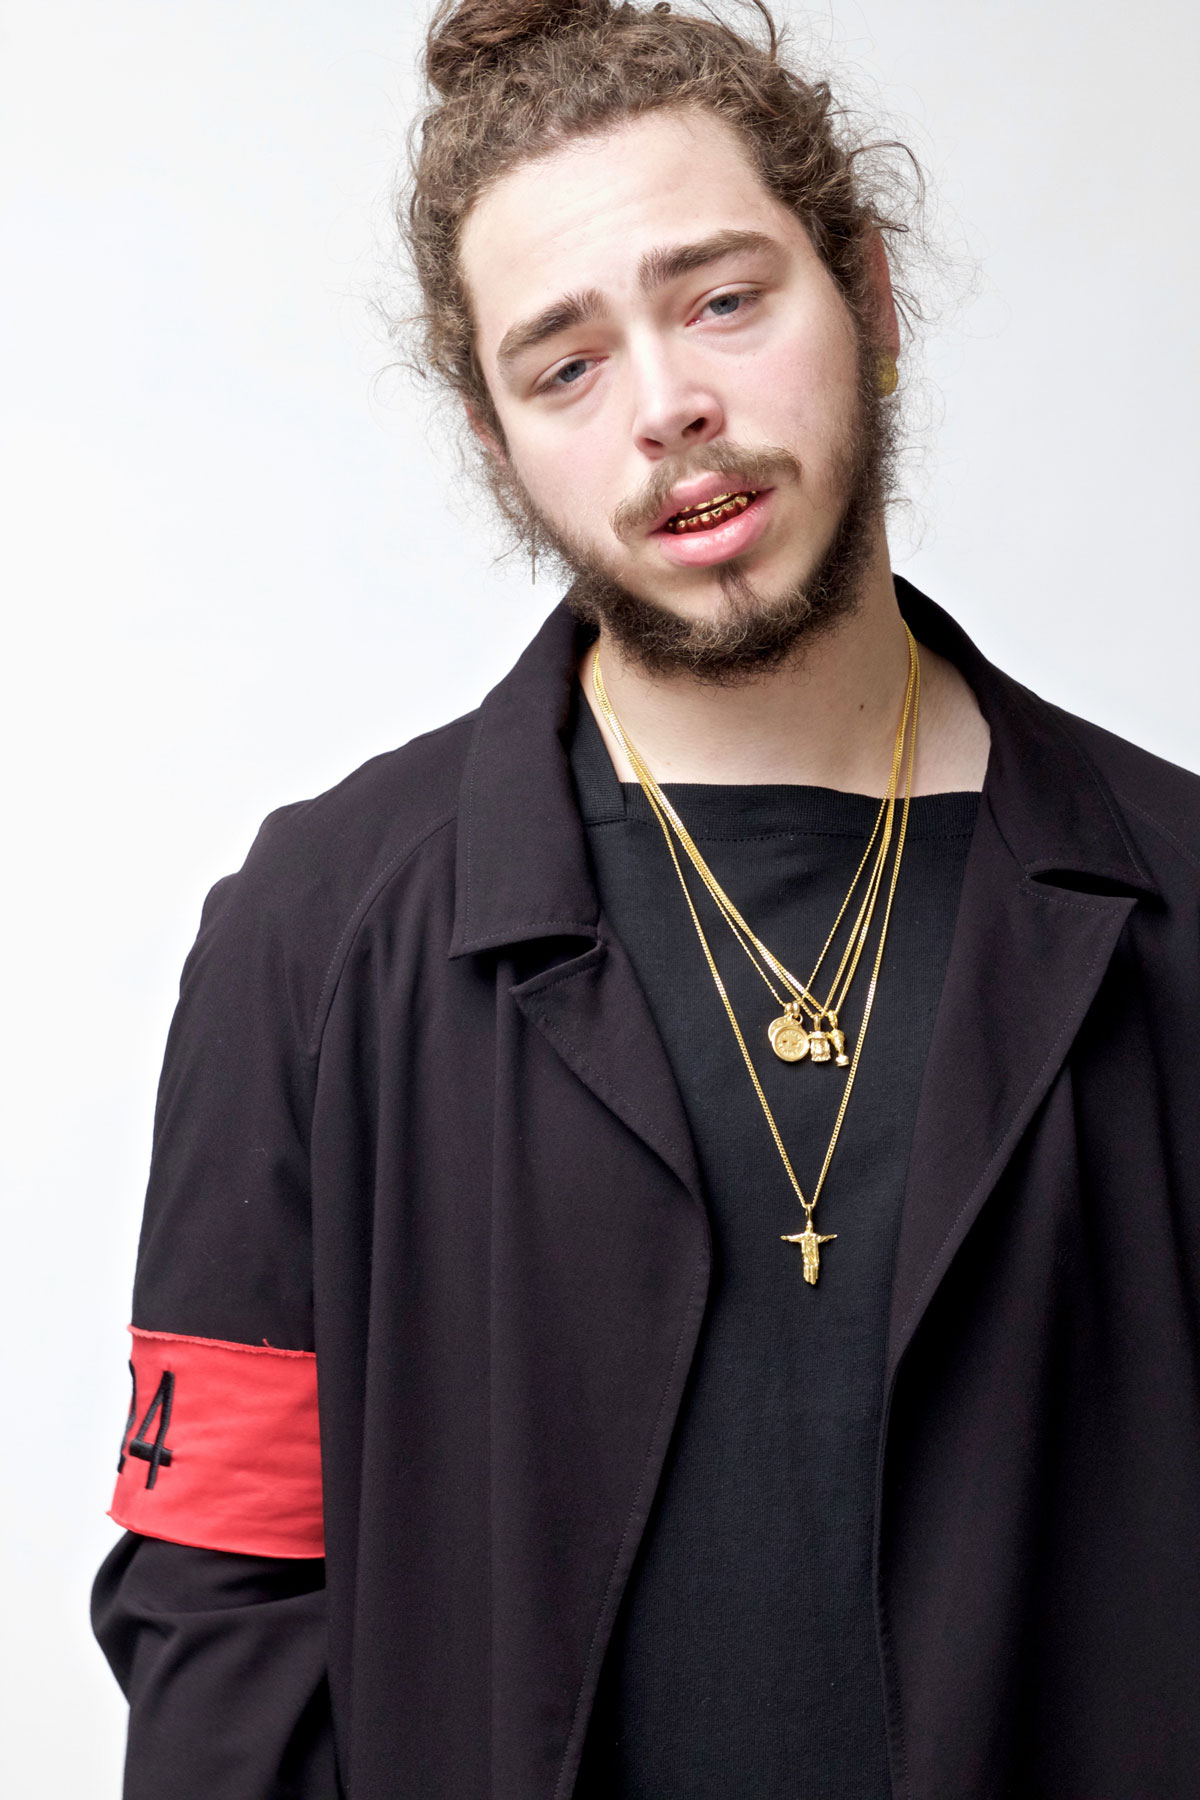 Post Malone Wallpapers High Quality | Download Free